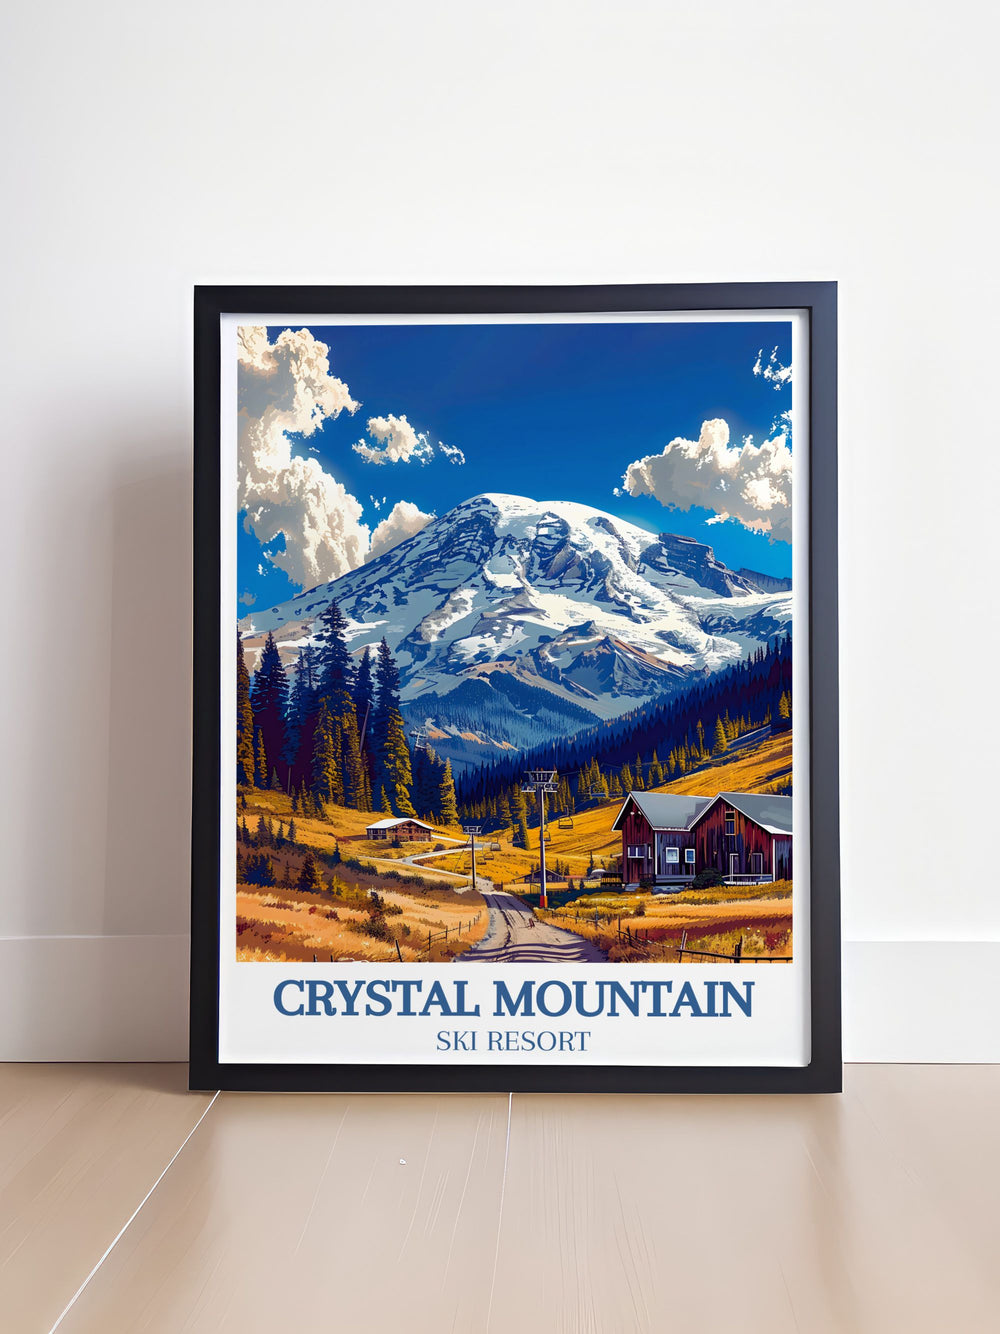 A stunning poster capturing the majestic views of Crystal Mountain and the thrill of skiing in Washington, perfect for winter sports enthusiasts and adventure lovers.